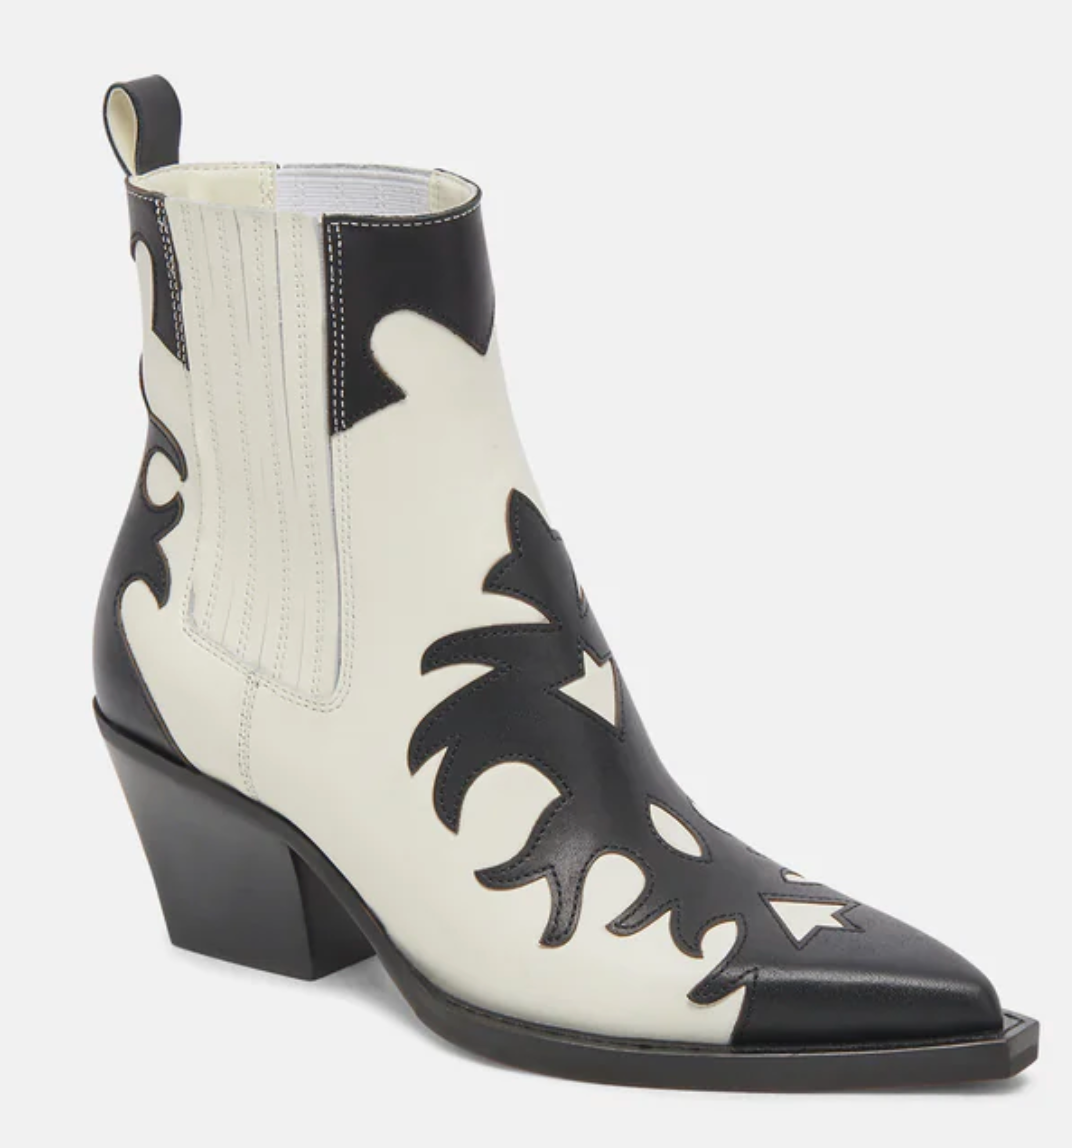 Dolce Vita Black and White Leather Boots